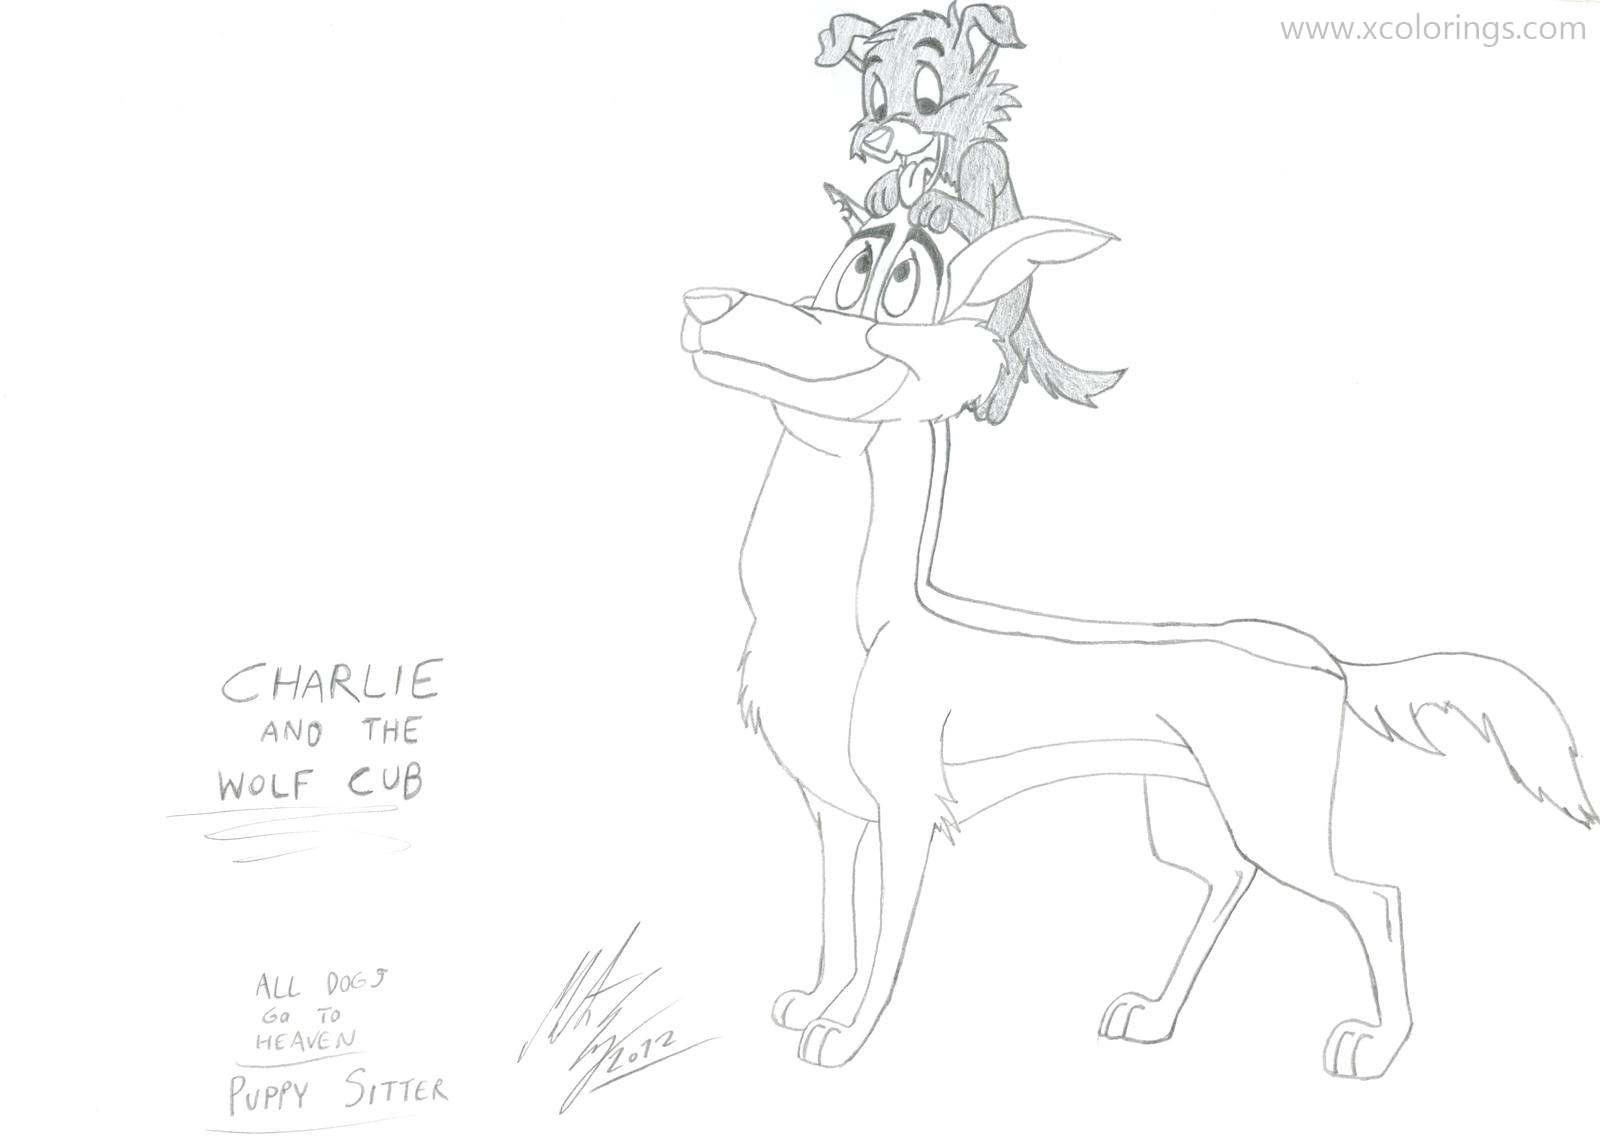 Free All Dogs Go To Heaven Coloring Pages Charlie and Puppy printable